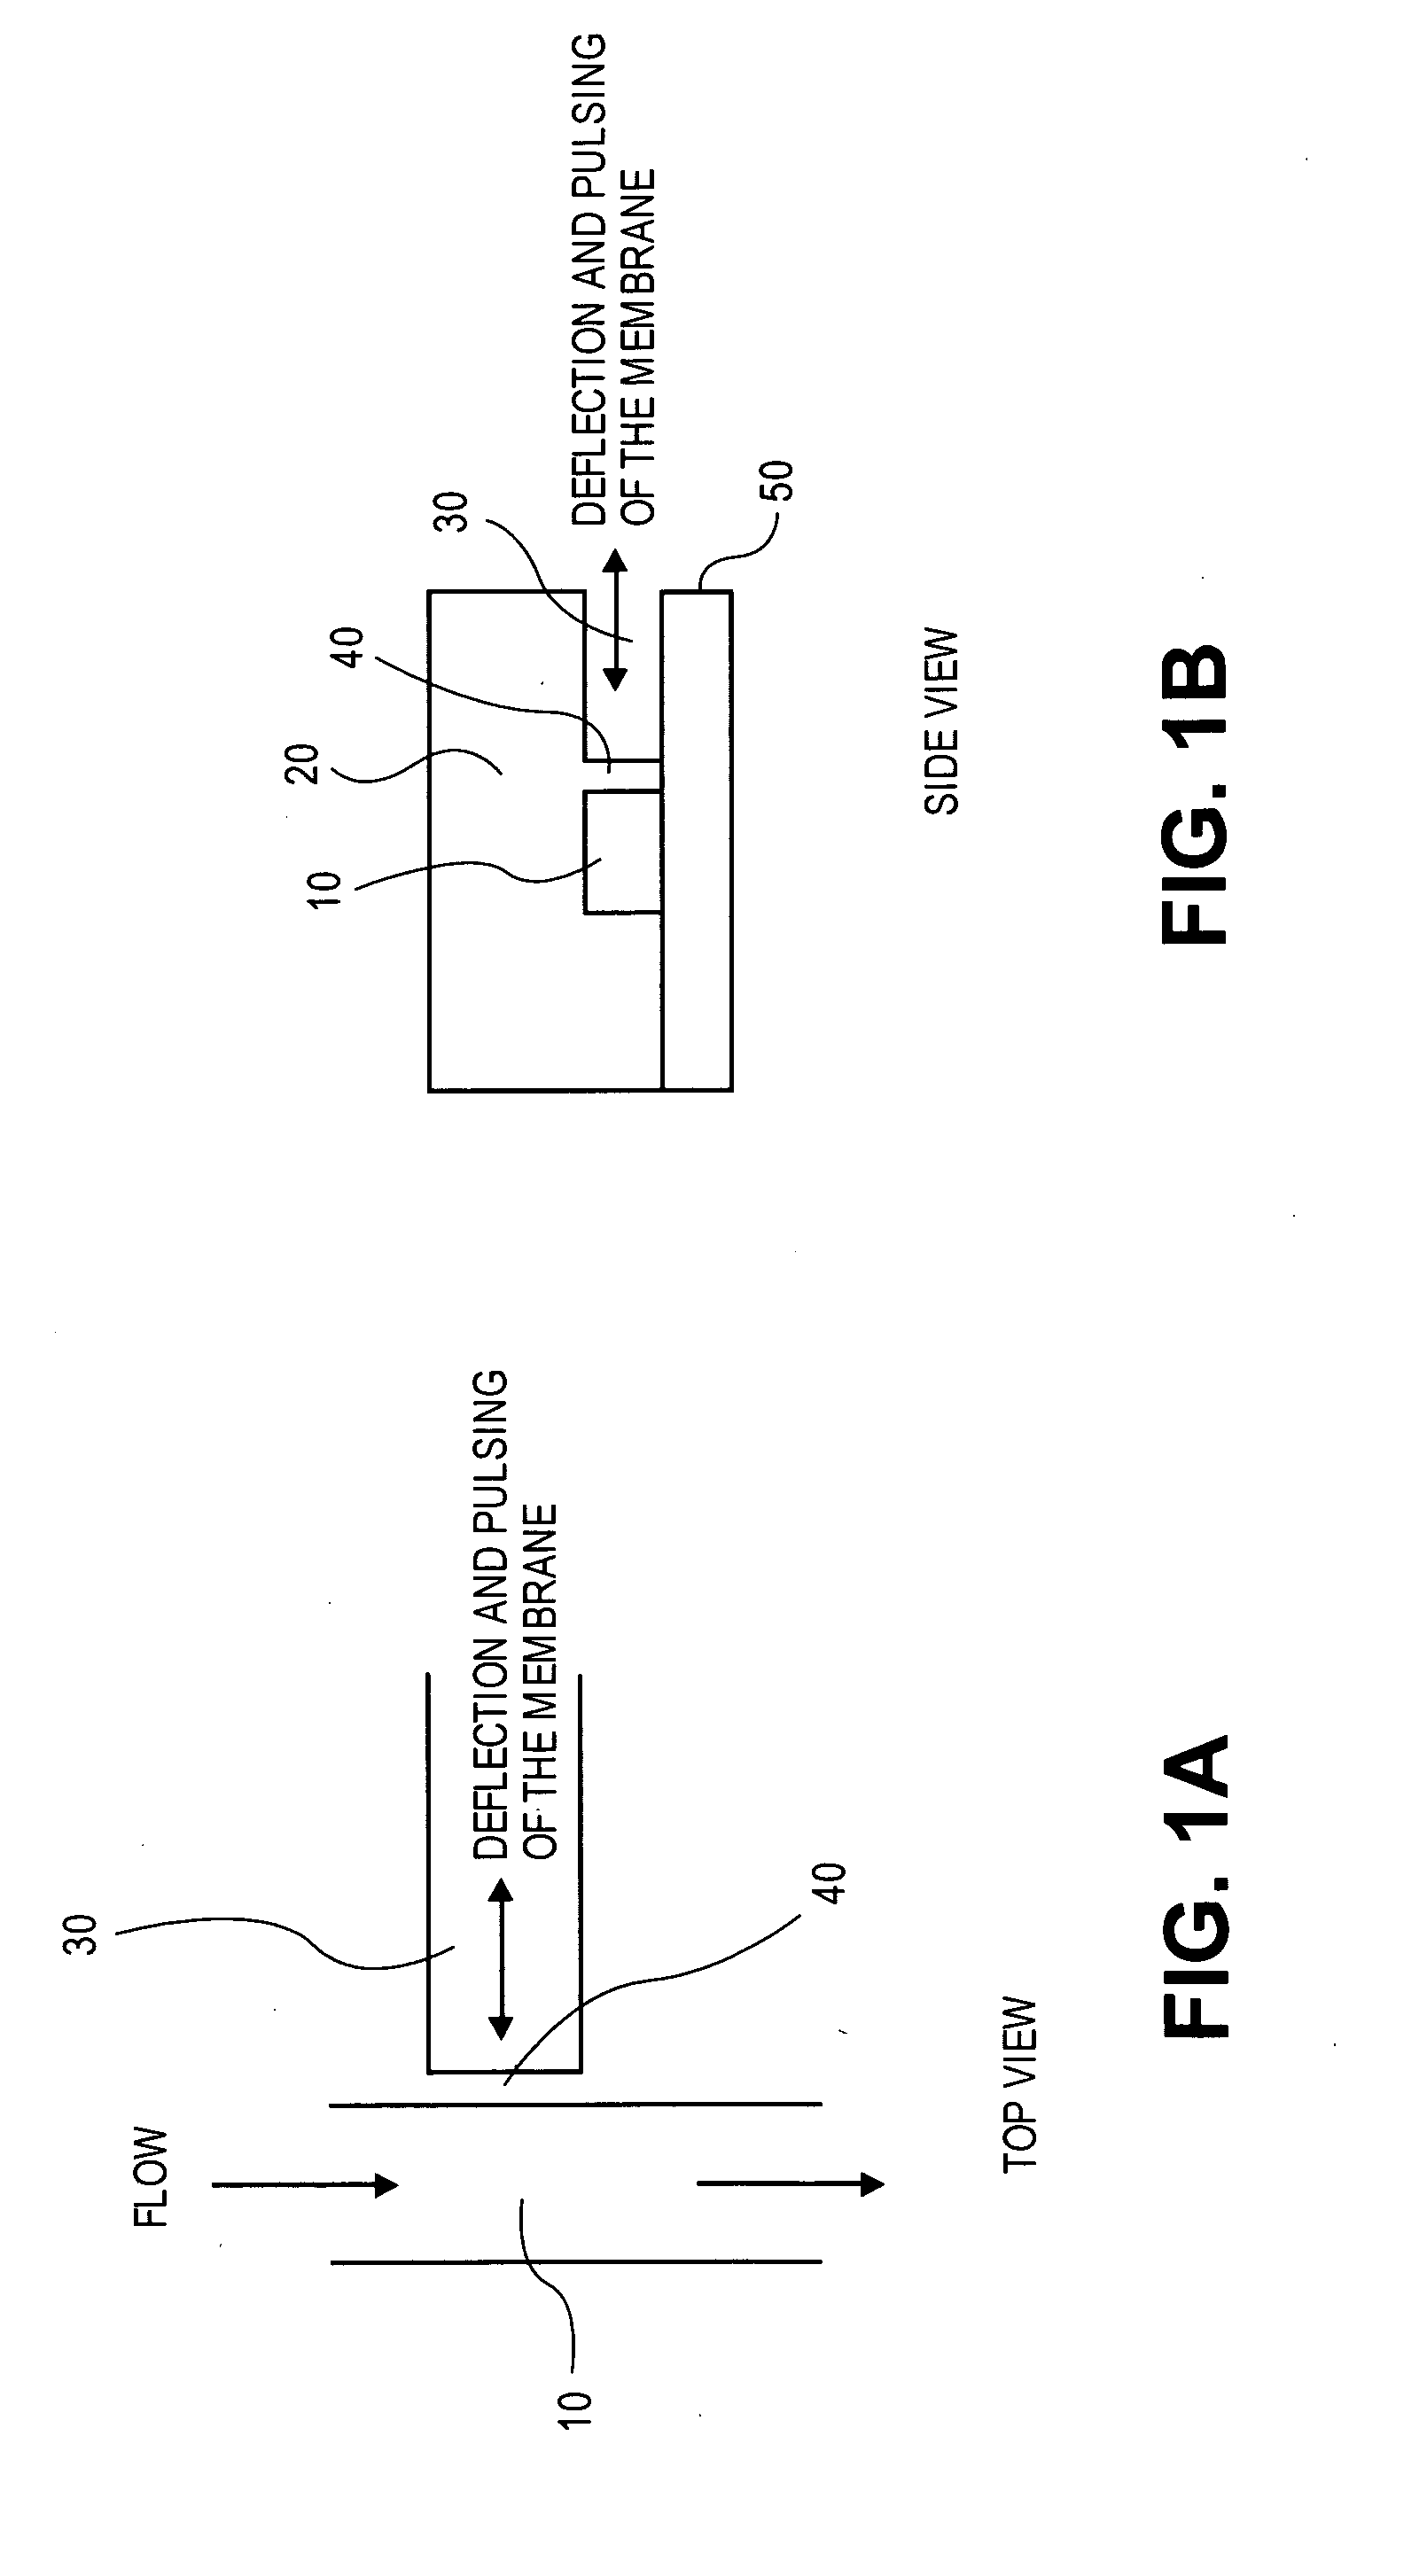 Deformable polymer membranes